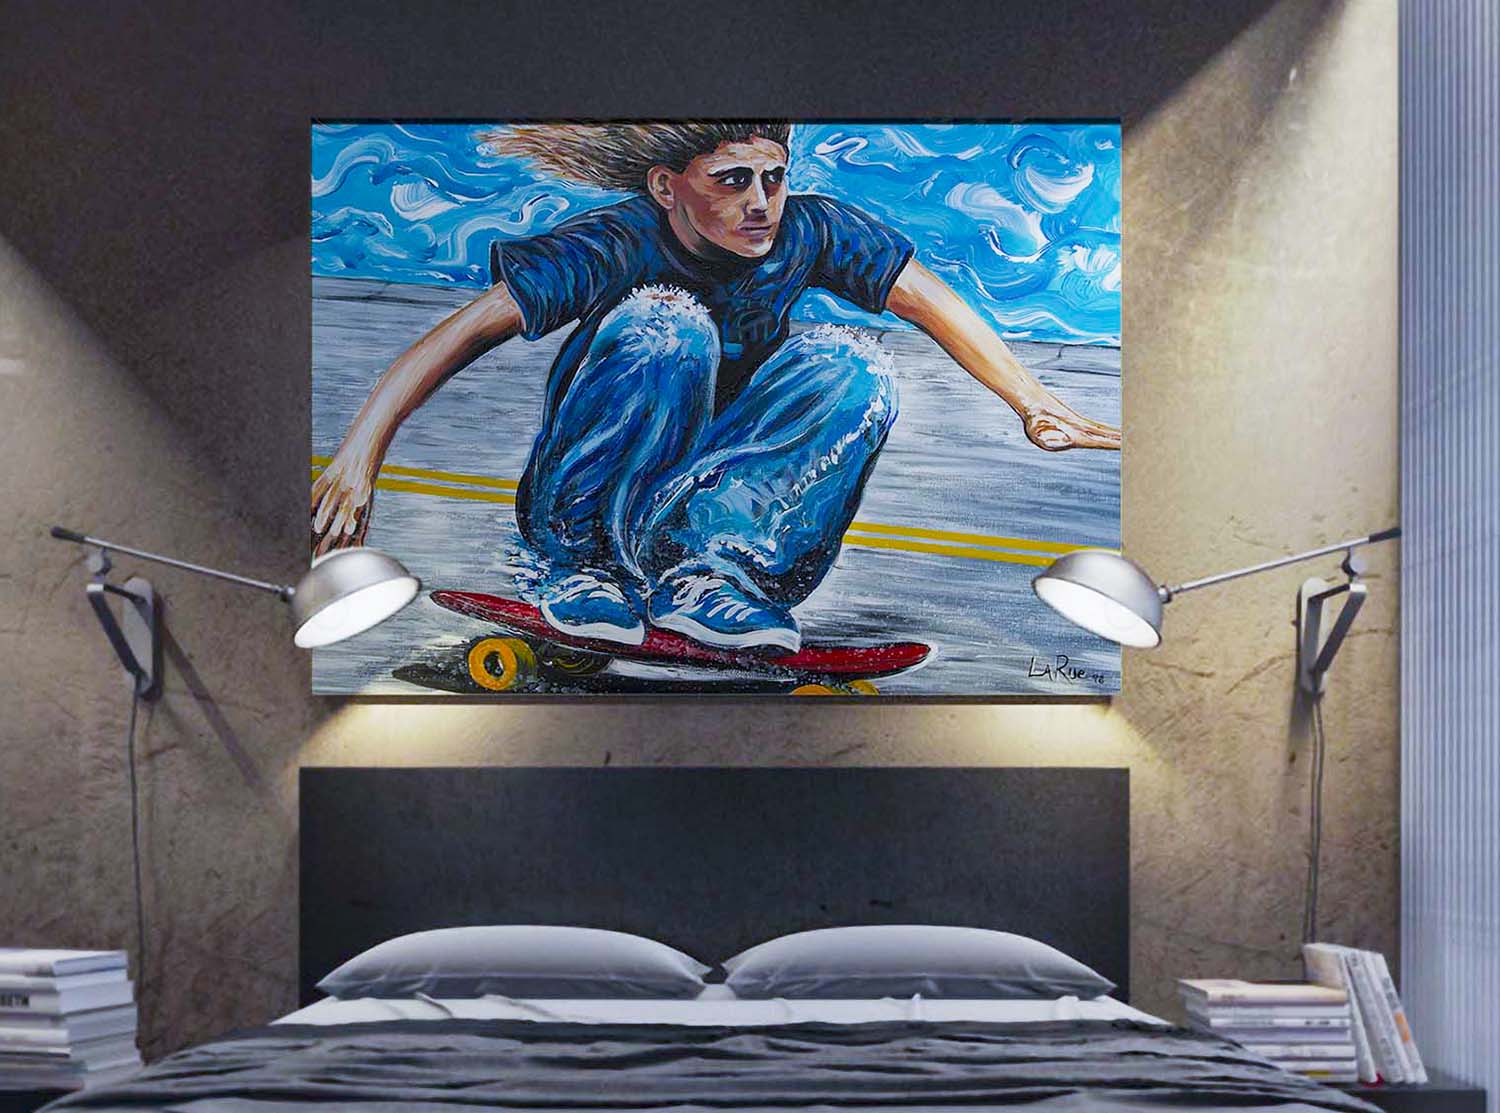 Zephyr Skates acrylic canvas painting by Doug LaRue on a wall in a bedroom